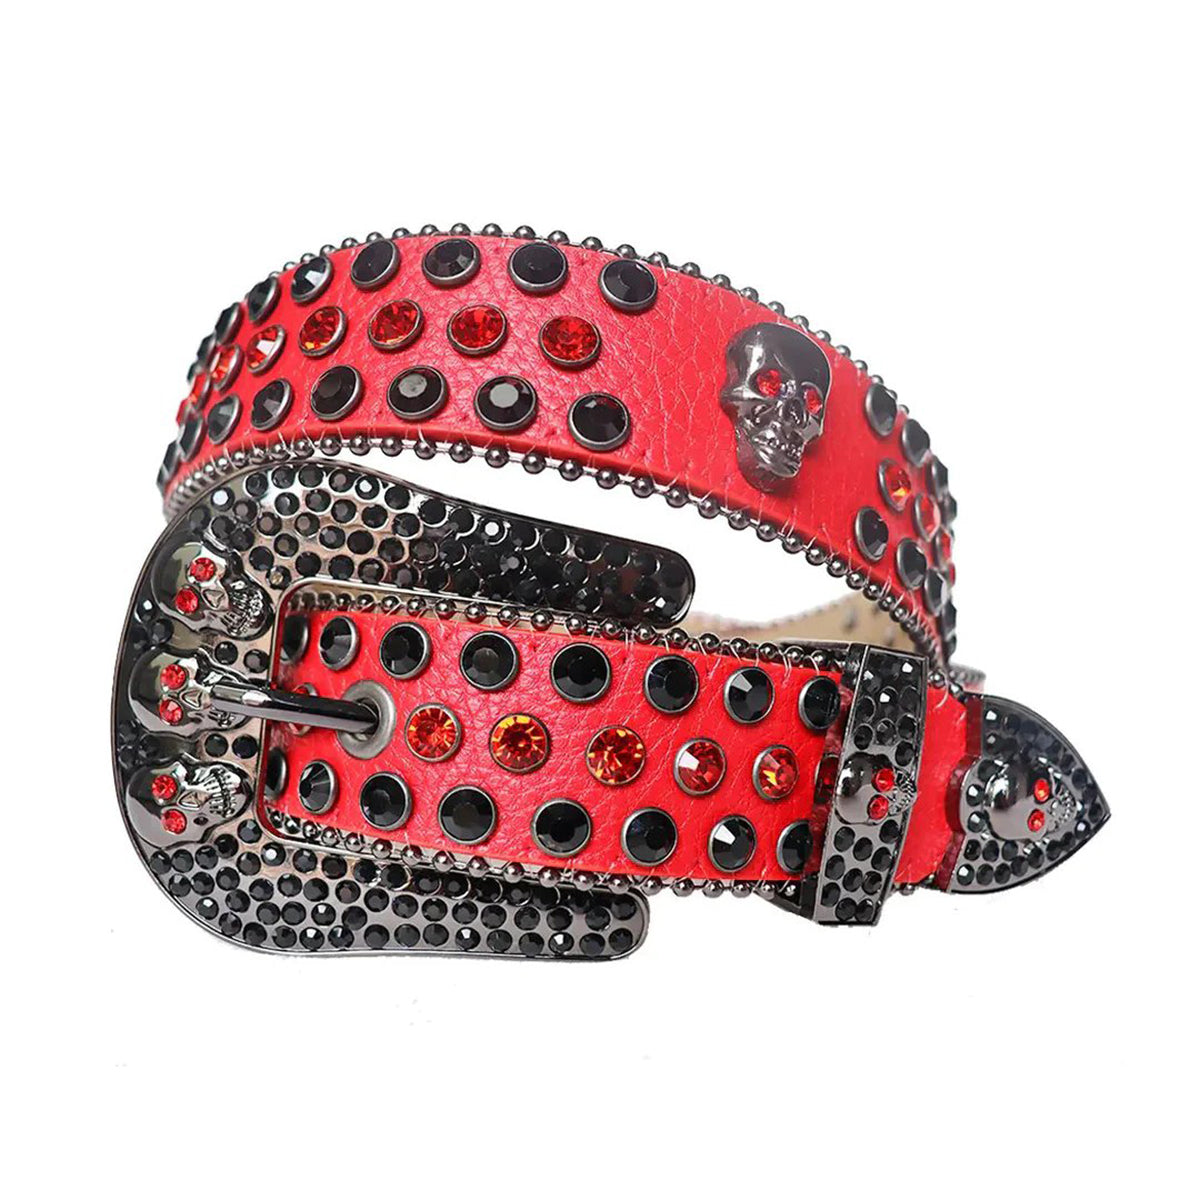 Black and Red Rhinestone Belt With Red Strap and Skull Buckles